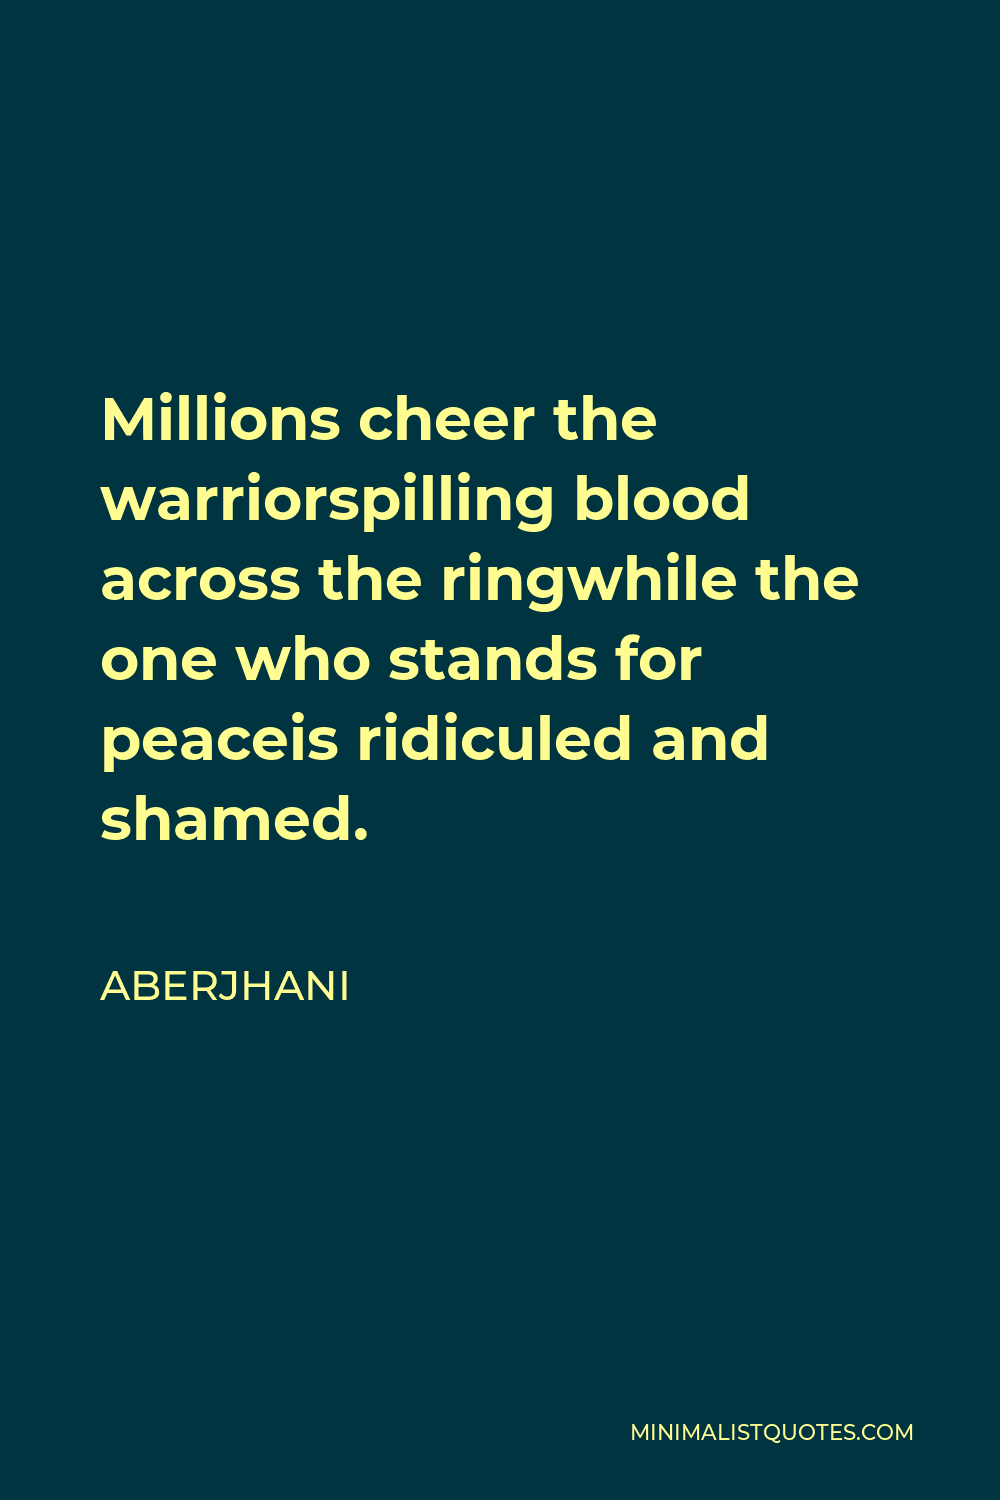 Aberjhani Quote - Millions cheer the warriorspilling blood across the ringwhile the one who stands for peaceis ridiculed and shamed.